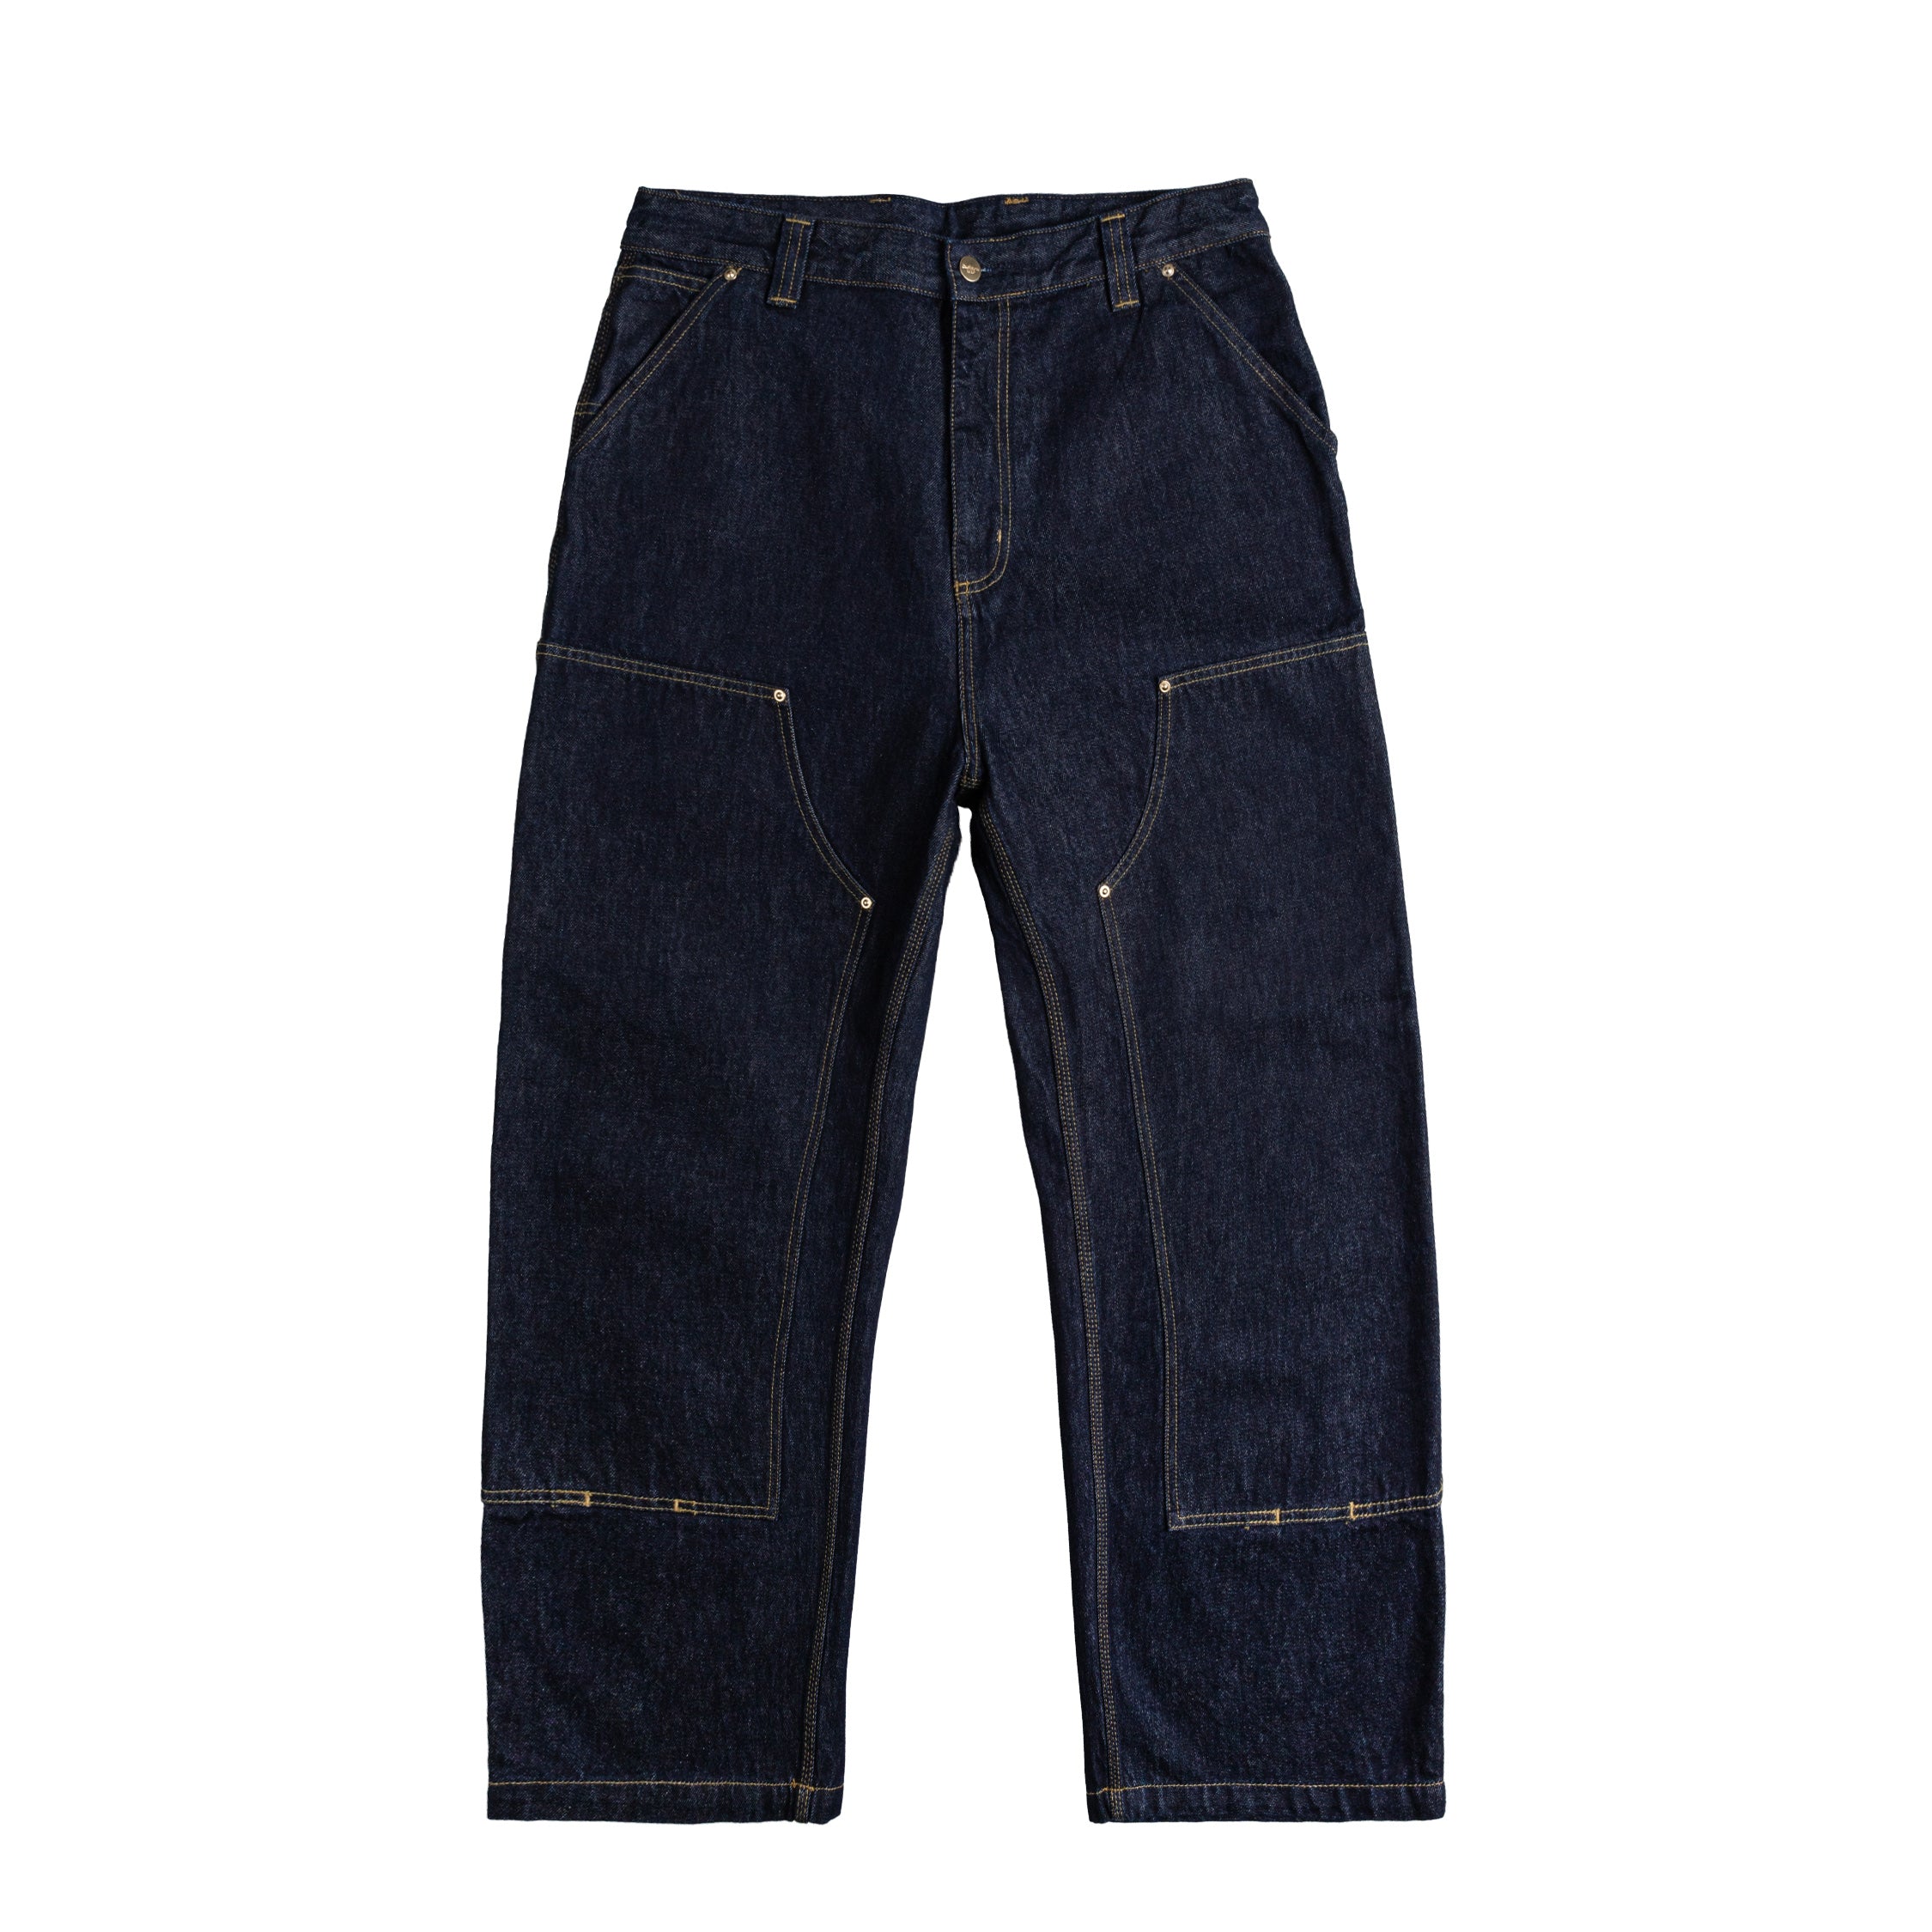 Carhartt WIP Nash Double Knee Pant – buy now at Asphaltgold Online Store!